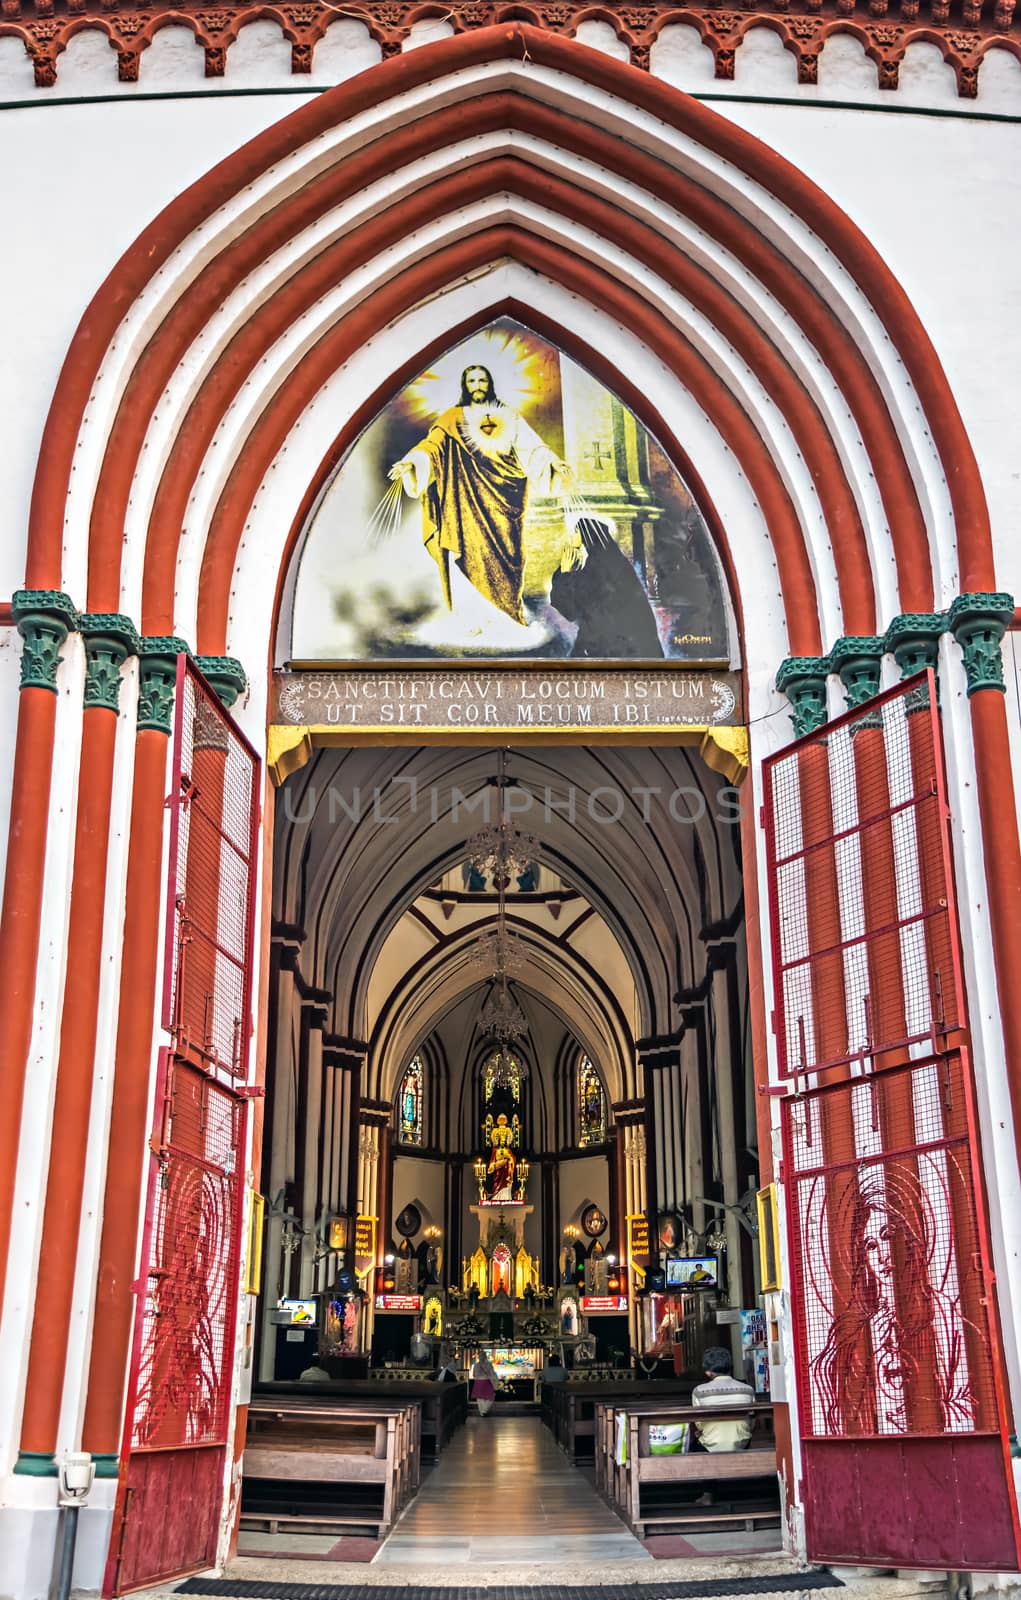 The entrance door of Basilica of the Sacred Heart of Jesus situated on the south boulevard of Pondicherry in Puducherry, India